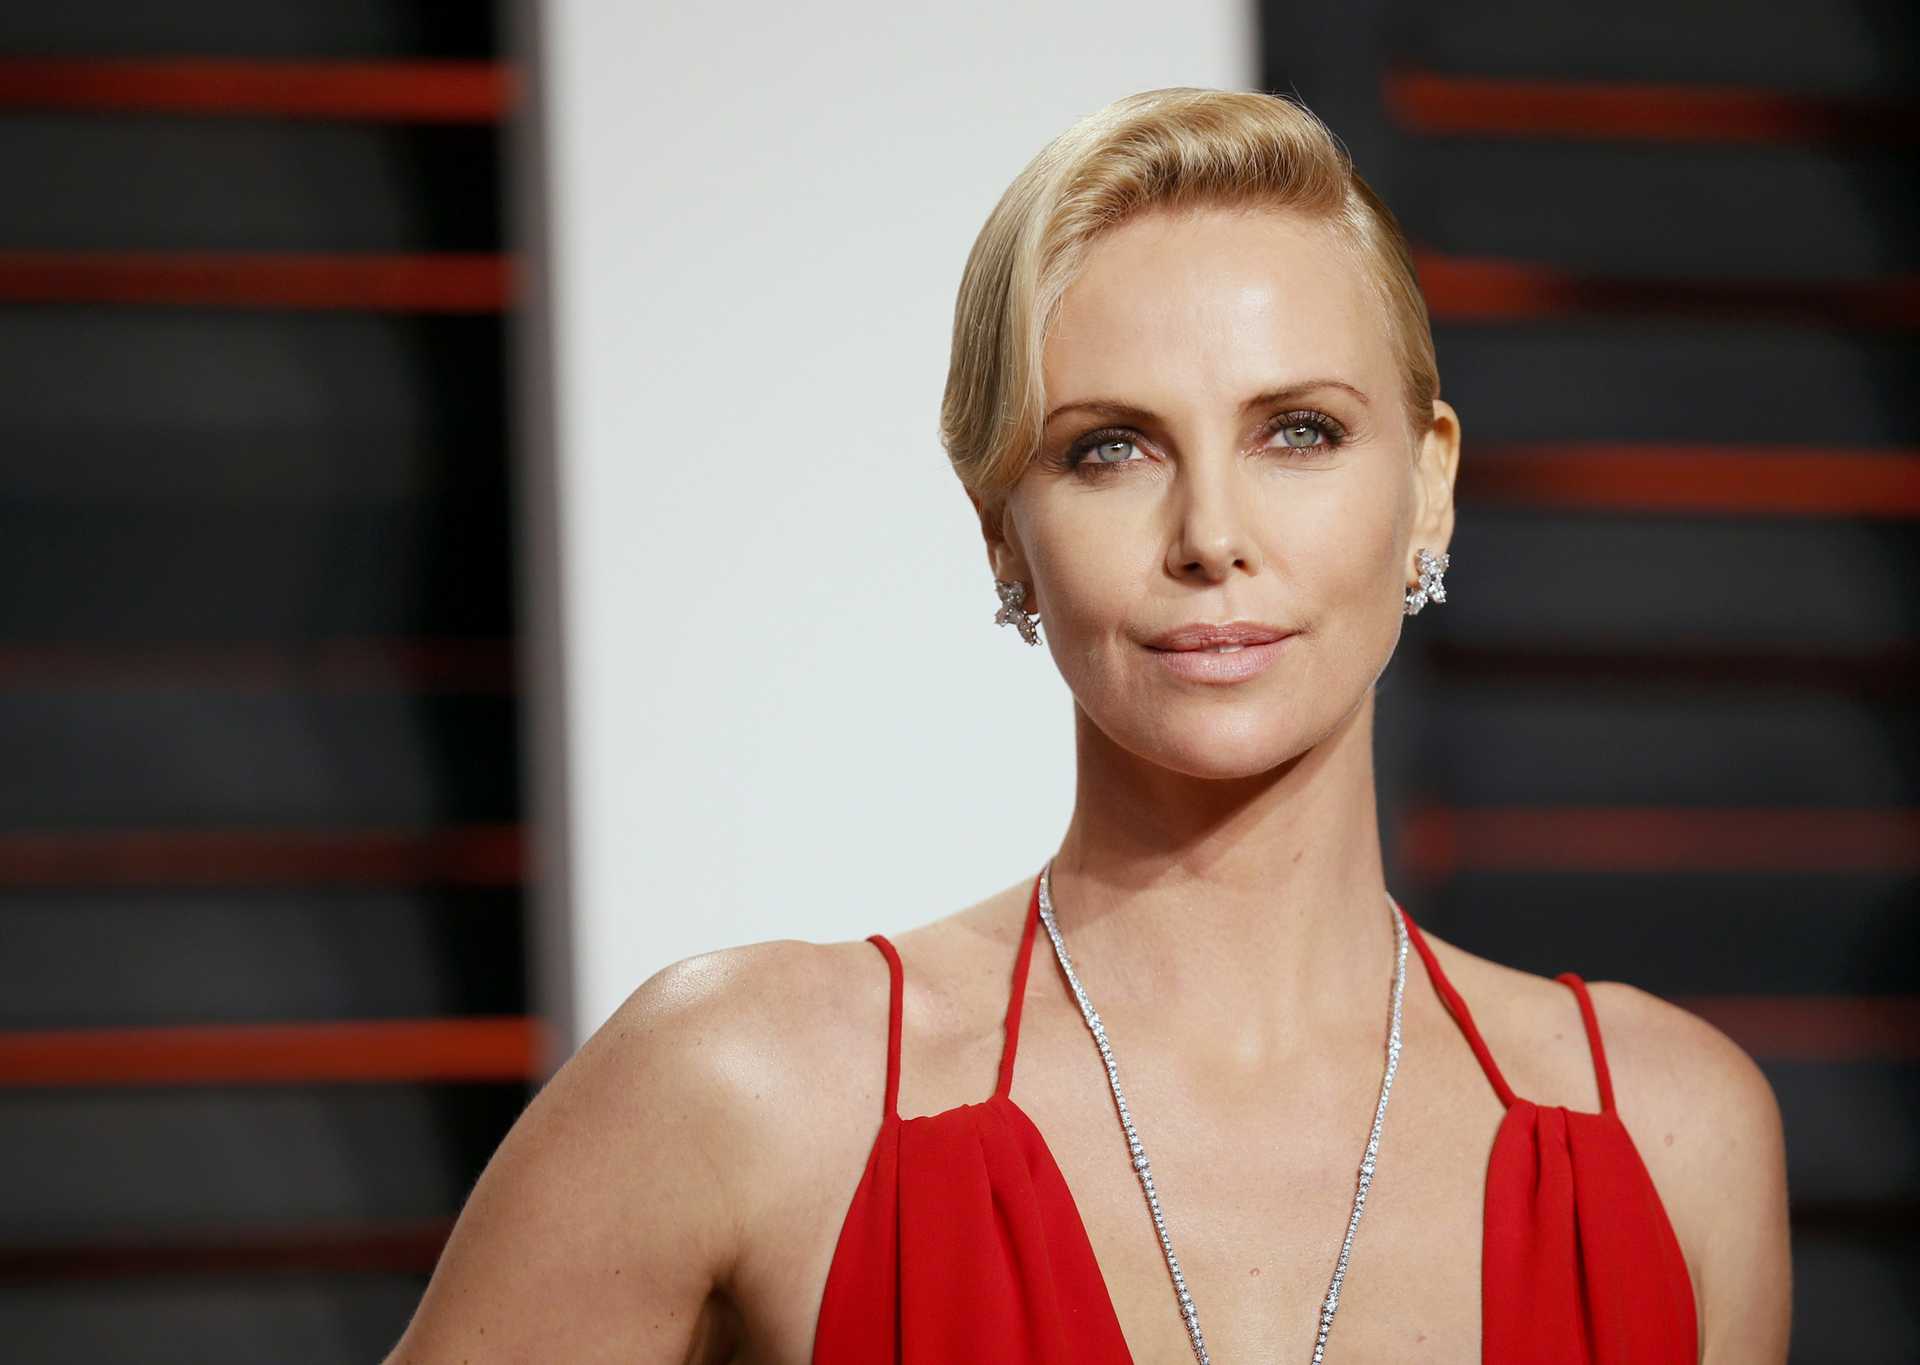 Actress Charlize Theron arrives at the Vanity Fair Oscar Party in Beverly Hills, California